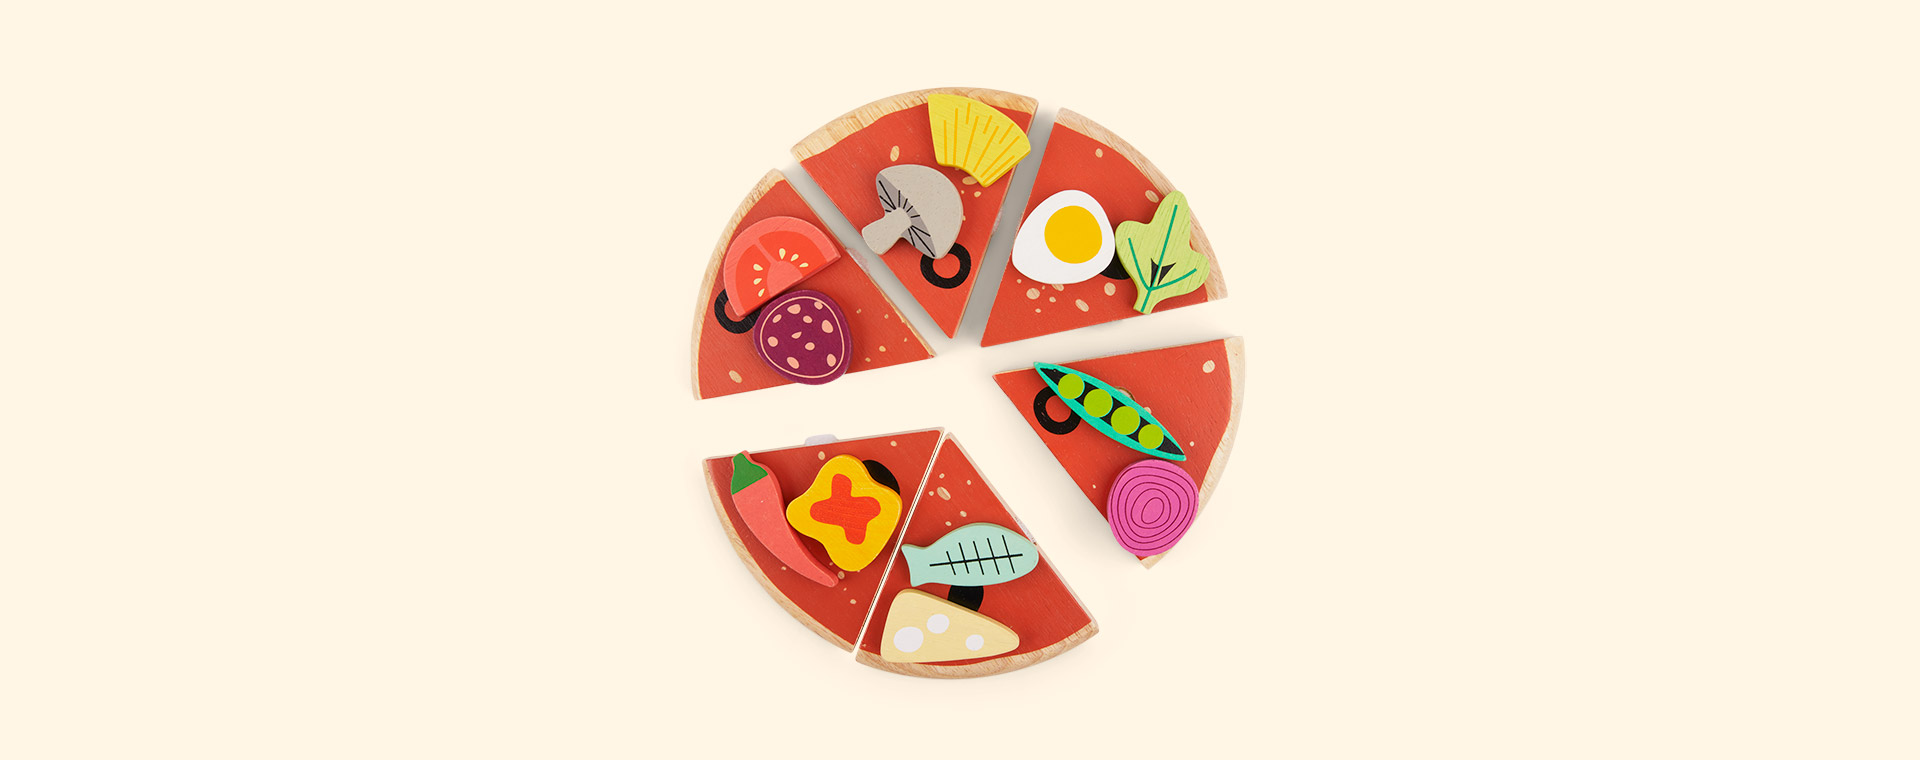 Multi Tender Leaf Toys Pizza Party